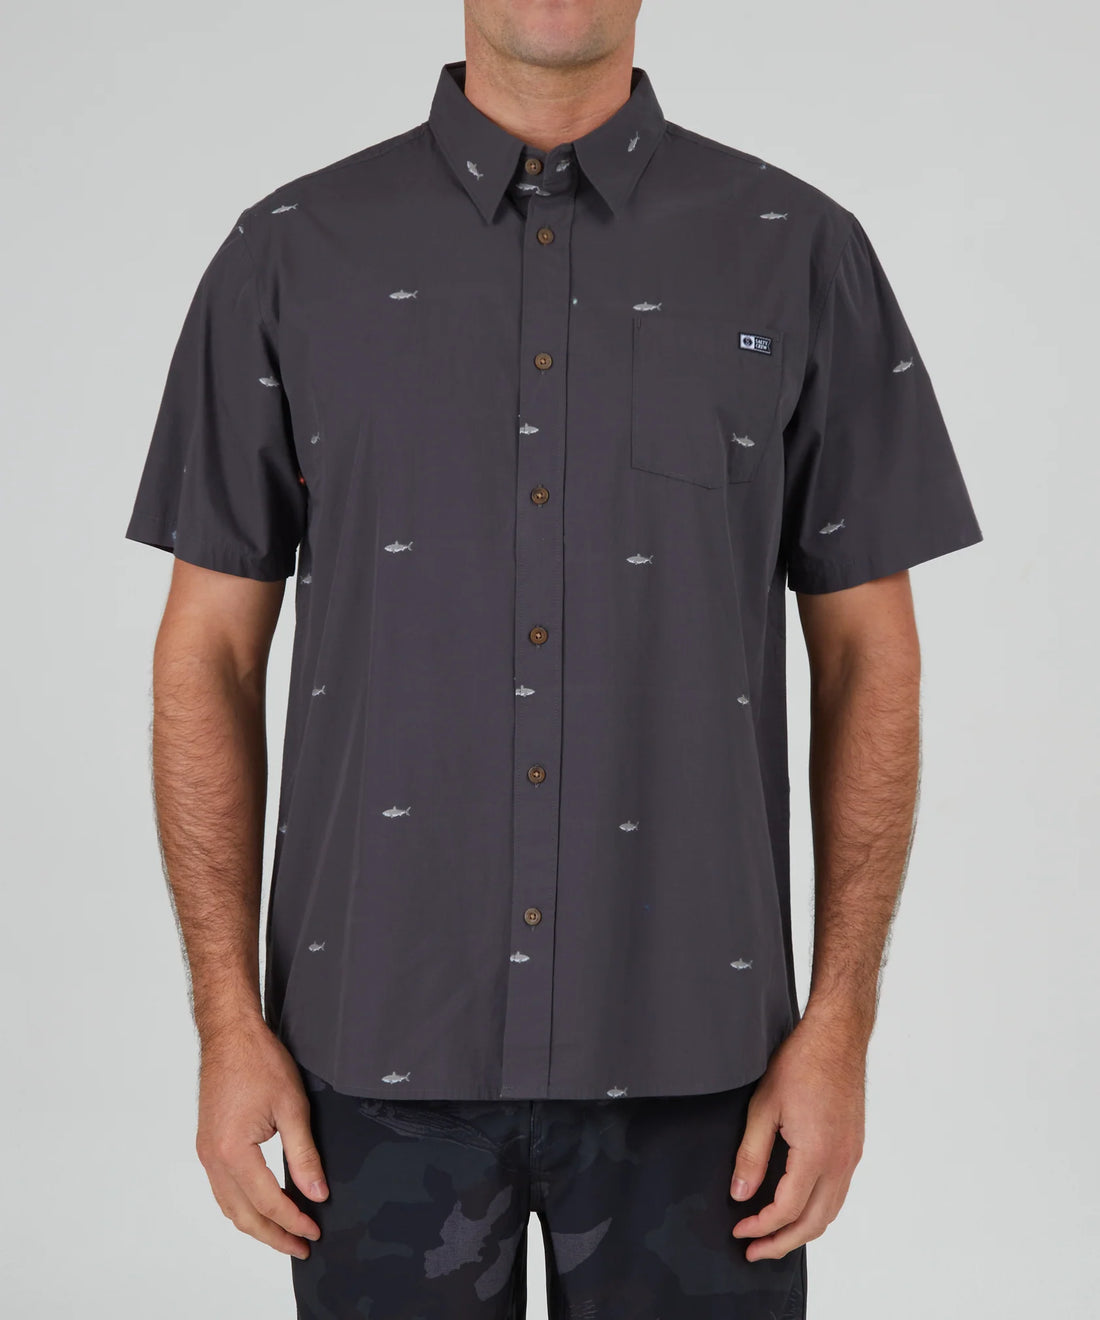 SALTY CREW BRUCE S/S WOVEN - CHARCOAL SHIRT SALTY CREW   